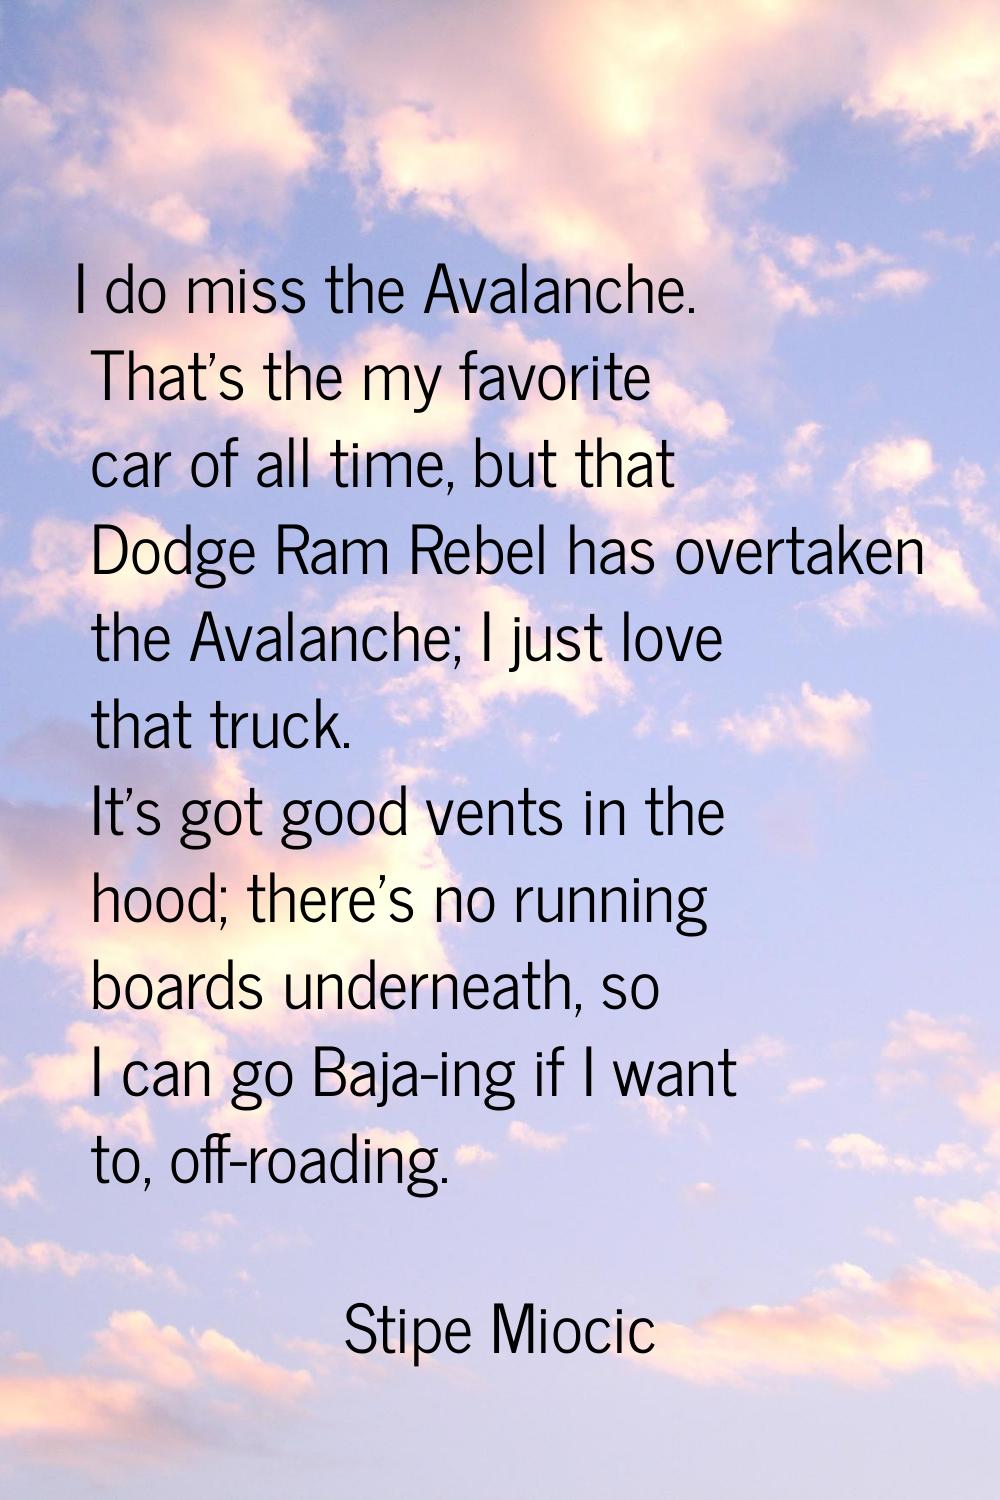 I do miss the Avalanche. That's the my favorite car of all time, but that Dodge Ram Rebel has overt